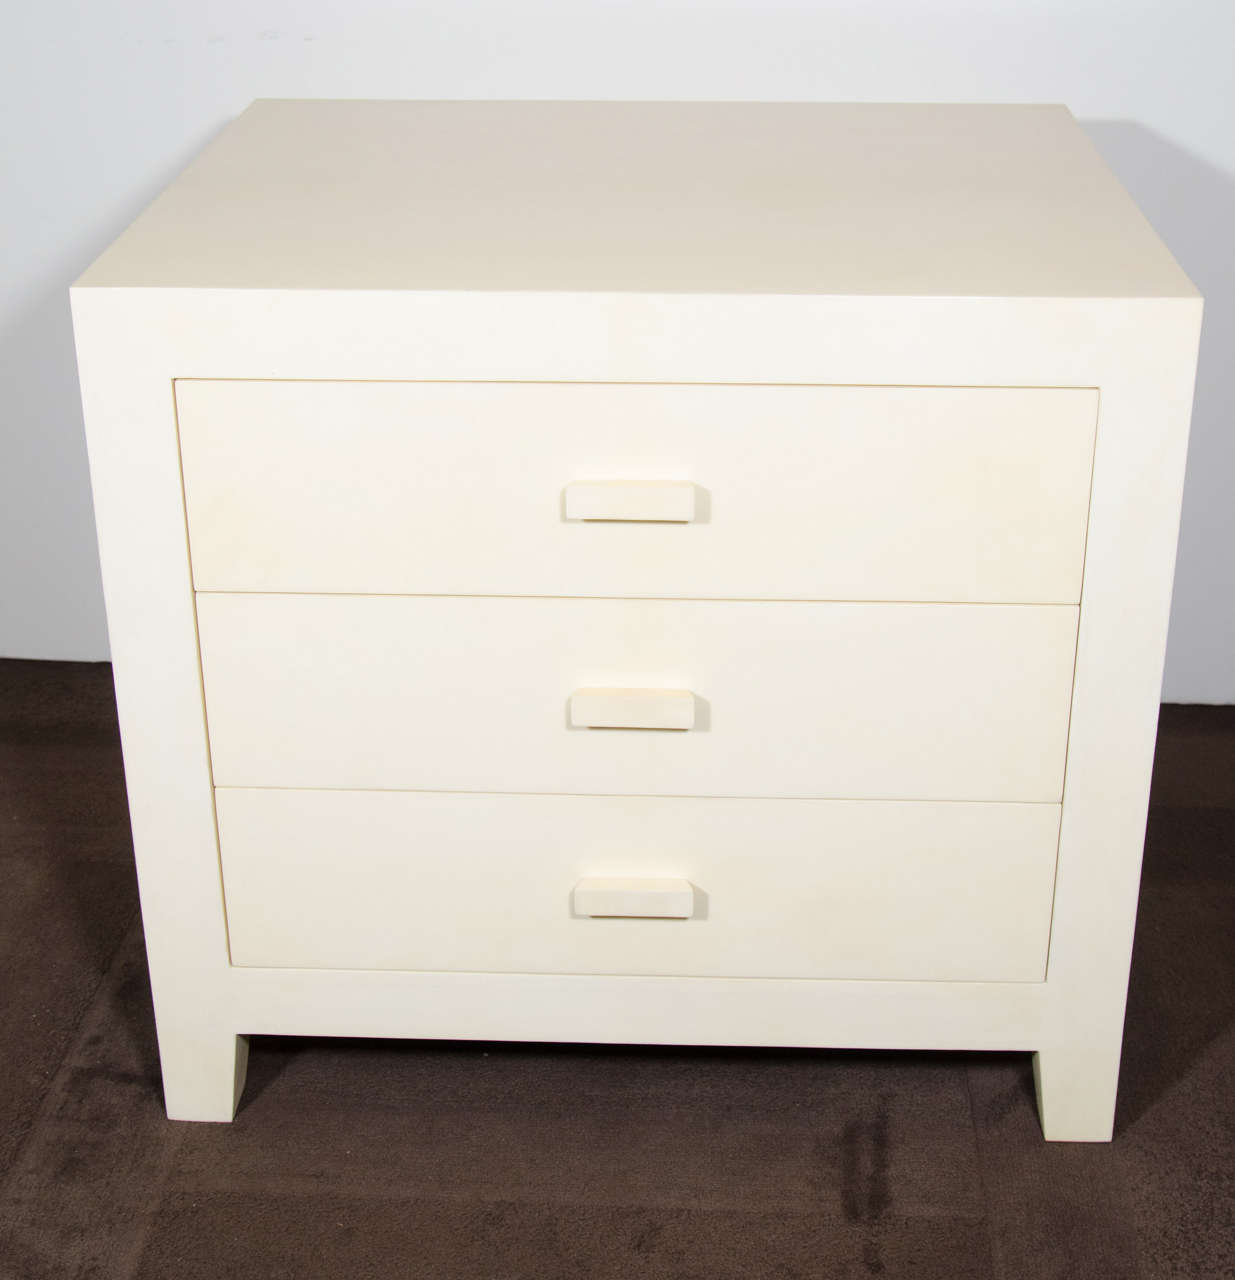 Pair of Ivory Parchment End Tables/ Night Stands with Modern Cube Design with Tapered Legs Detail and Fitted with 3 Drawers. The night stands have walnut wood interiors.